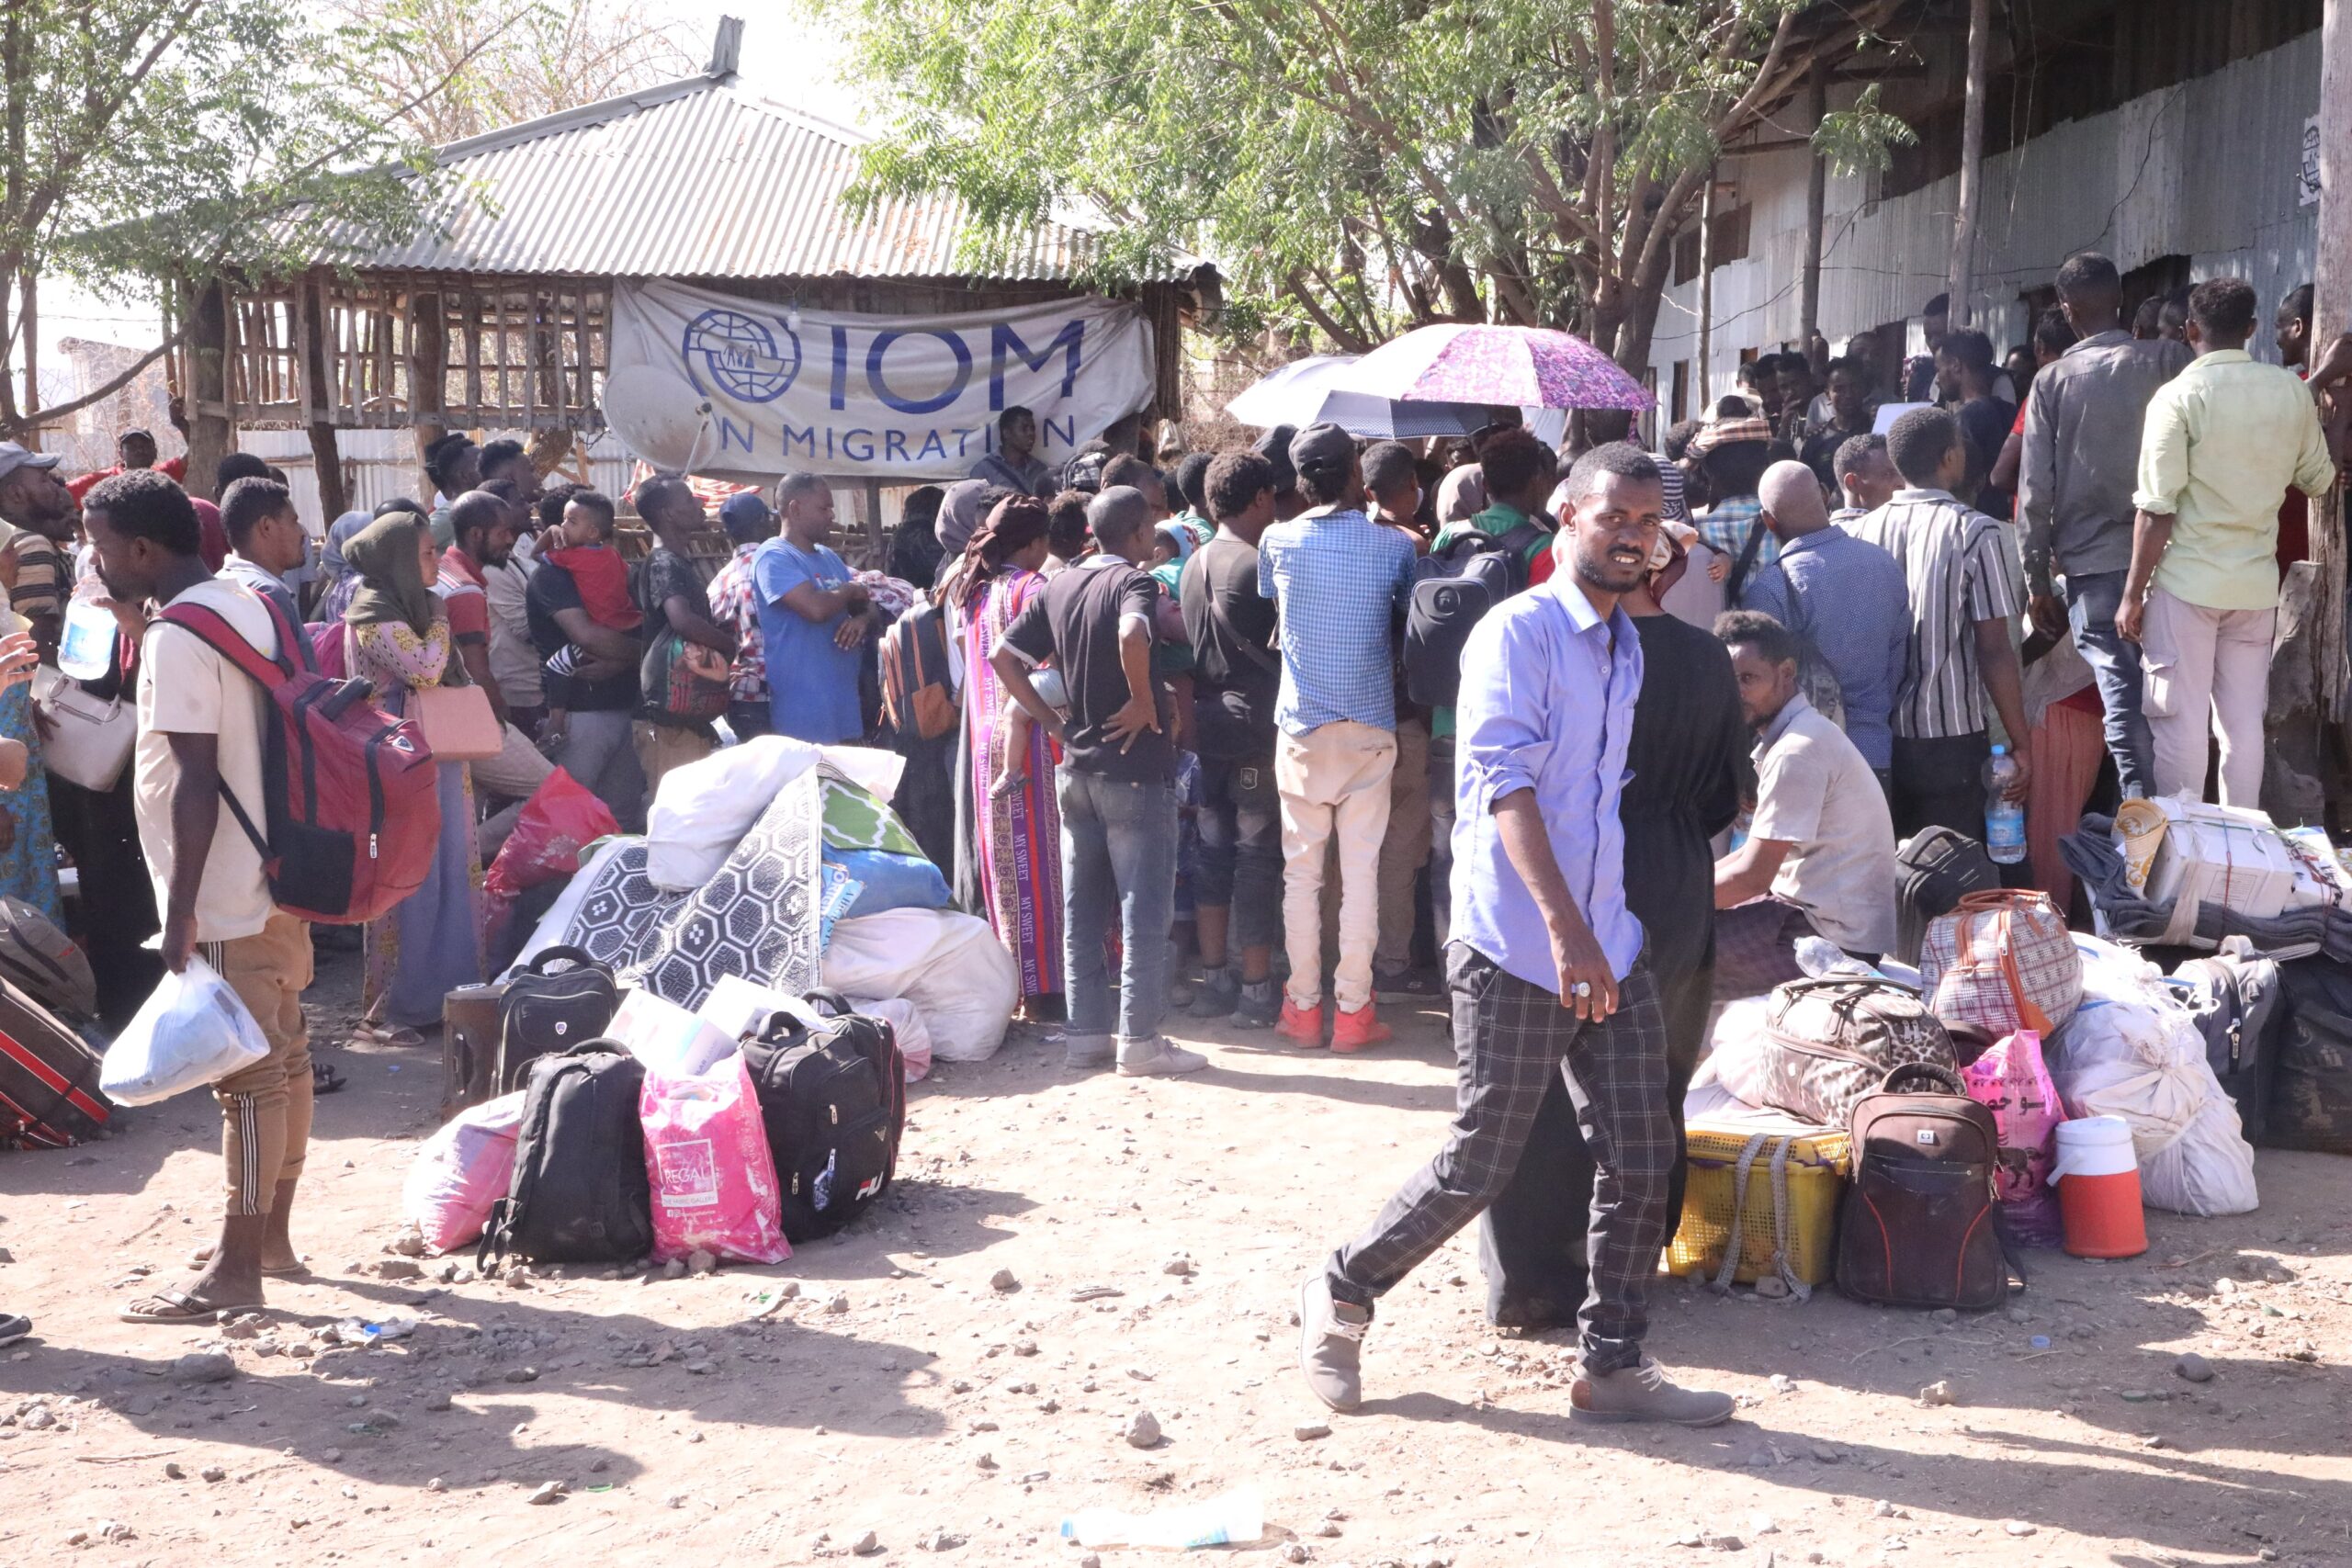 News: More than 18, 000 displaced people arrive in Metema feeling violence in Sudan; first arrivals cross into Gambella - Addis Standard